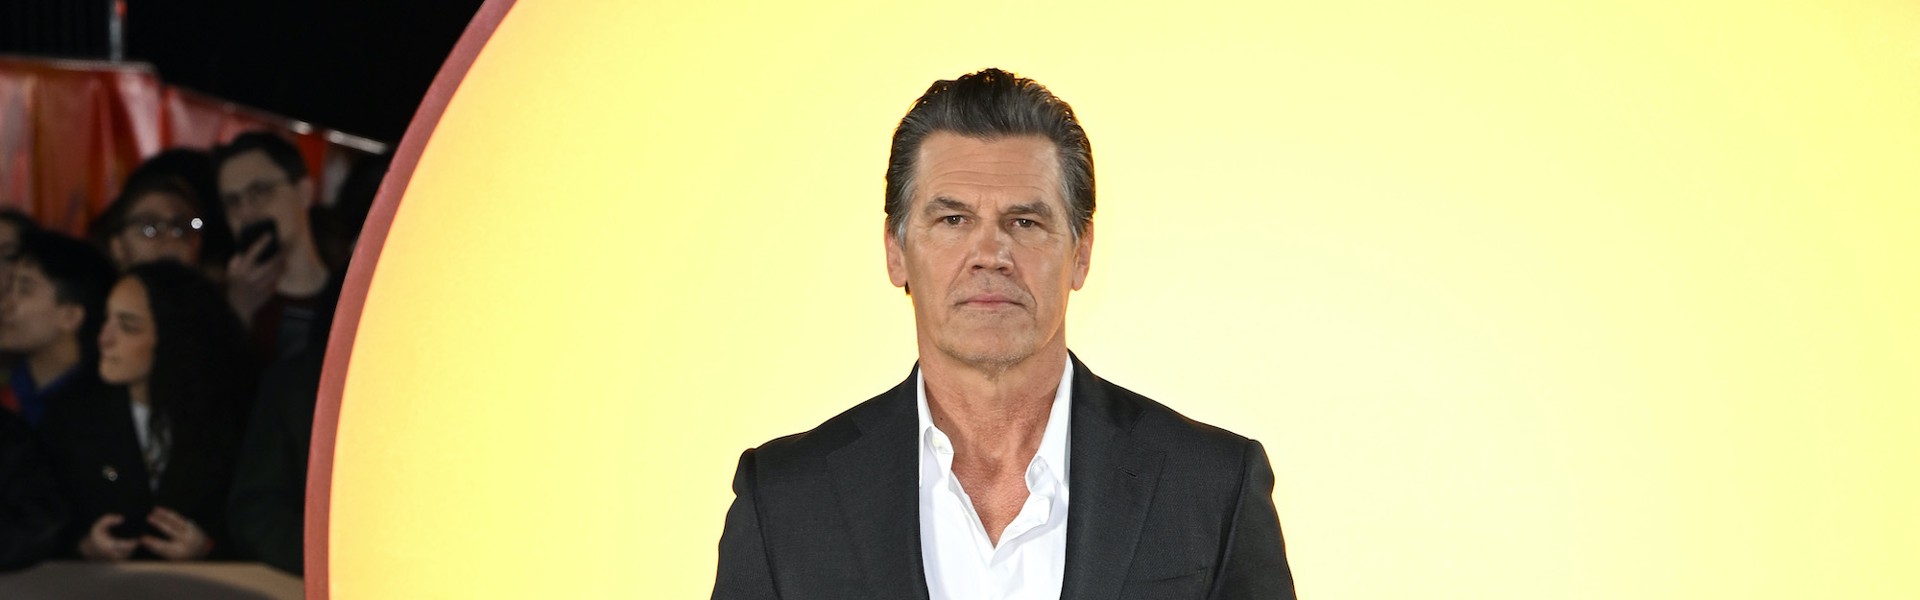 “Wake Up Dead Man: A Knives Out Mystery”: Josh Brolin Joins Daniel Craig